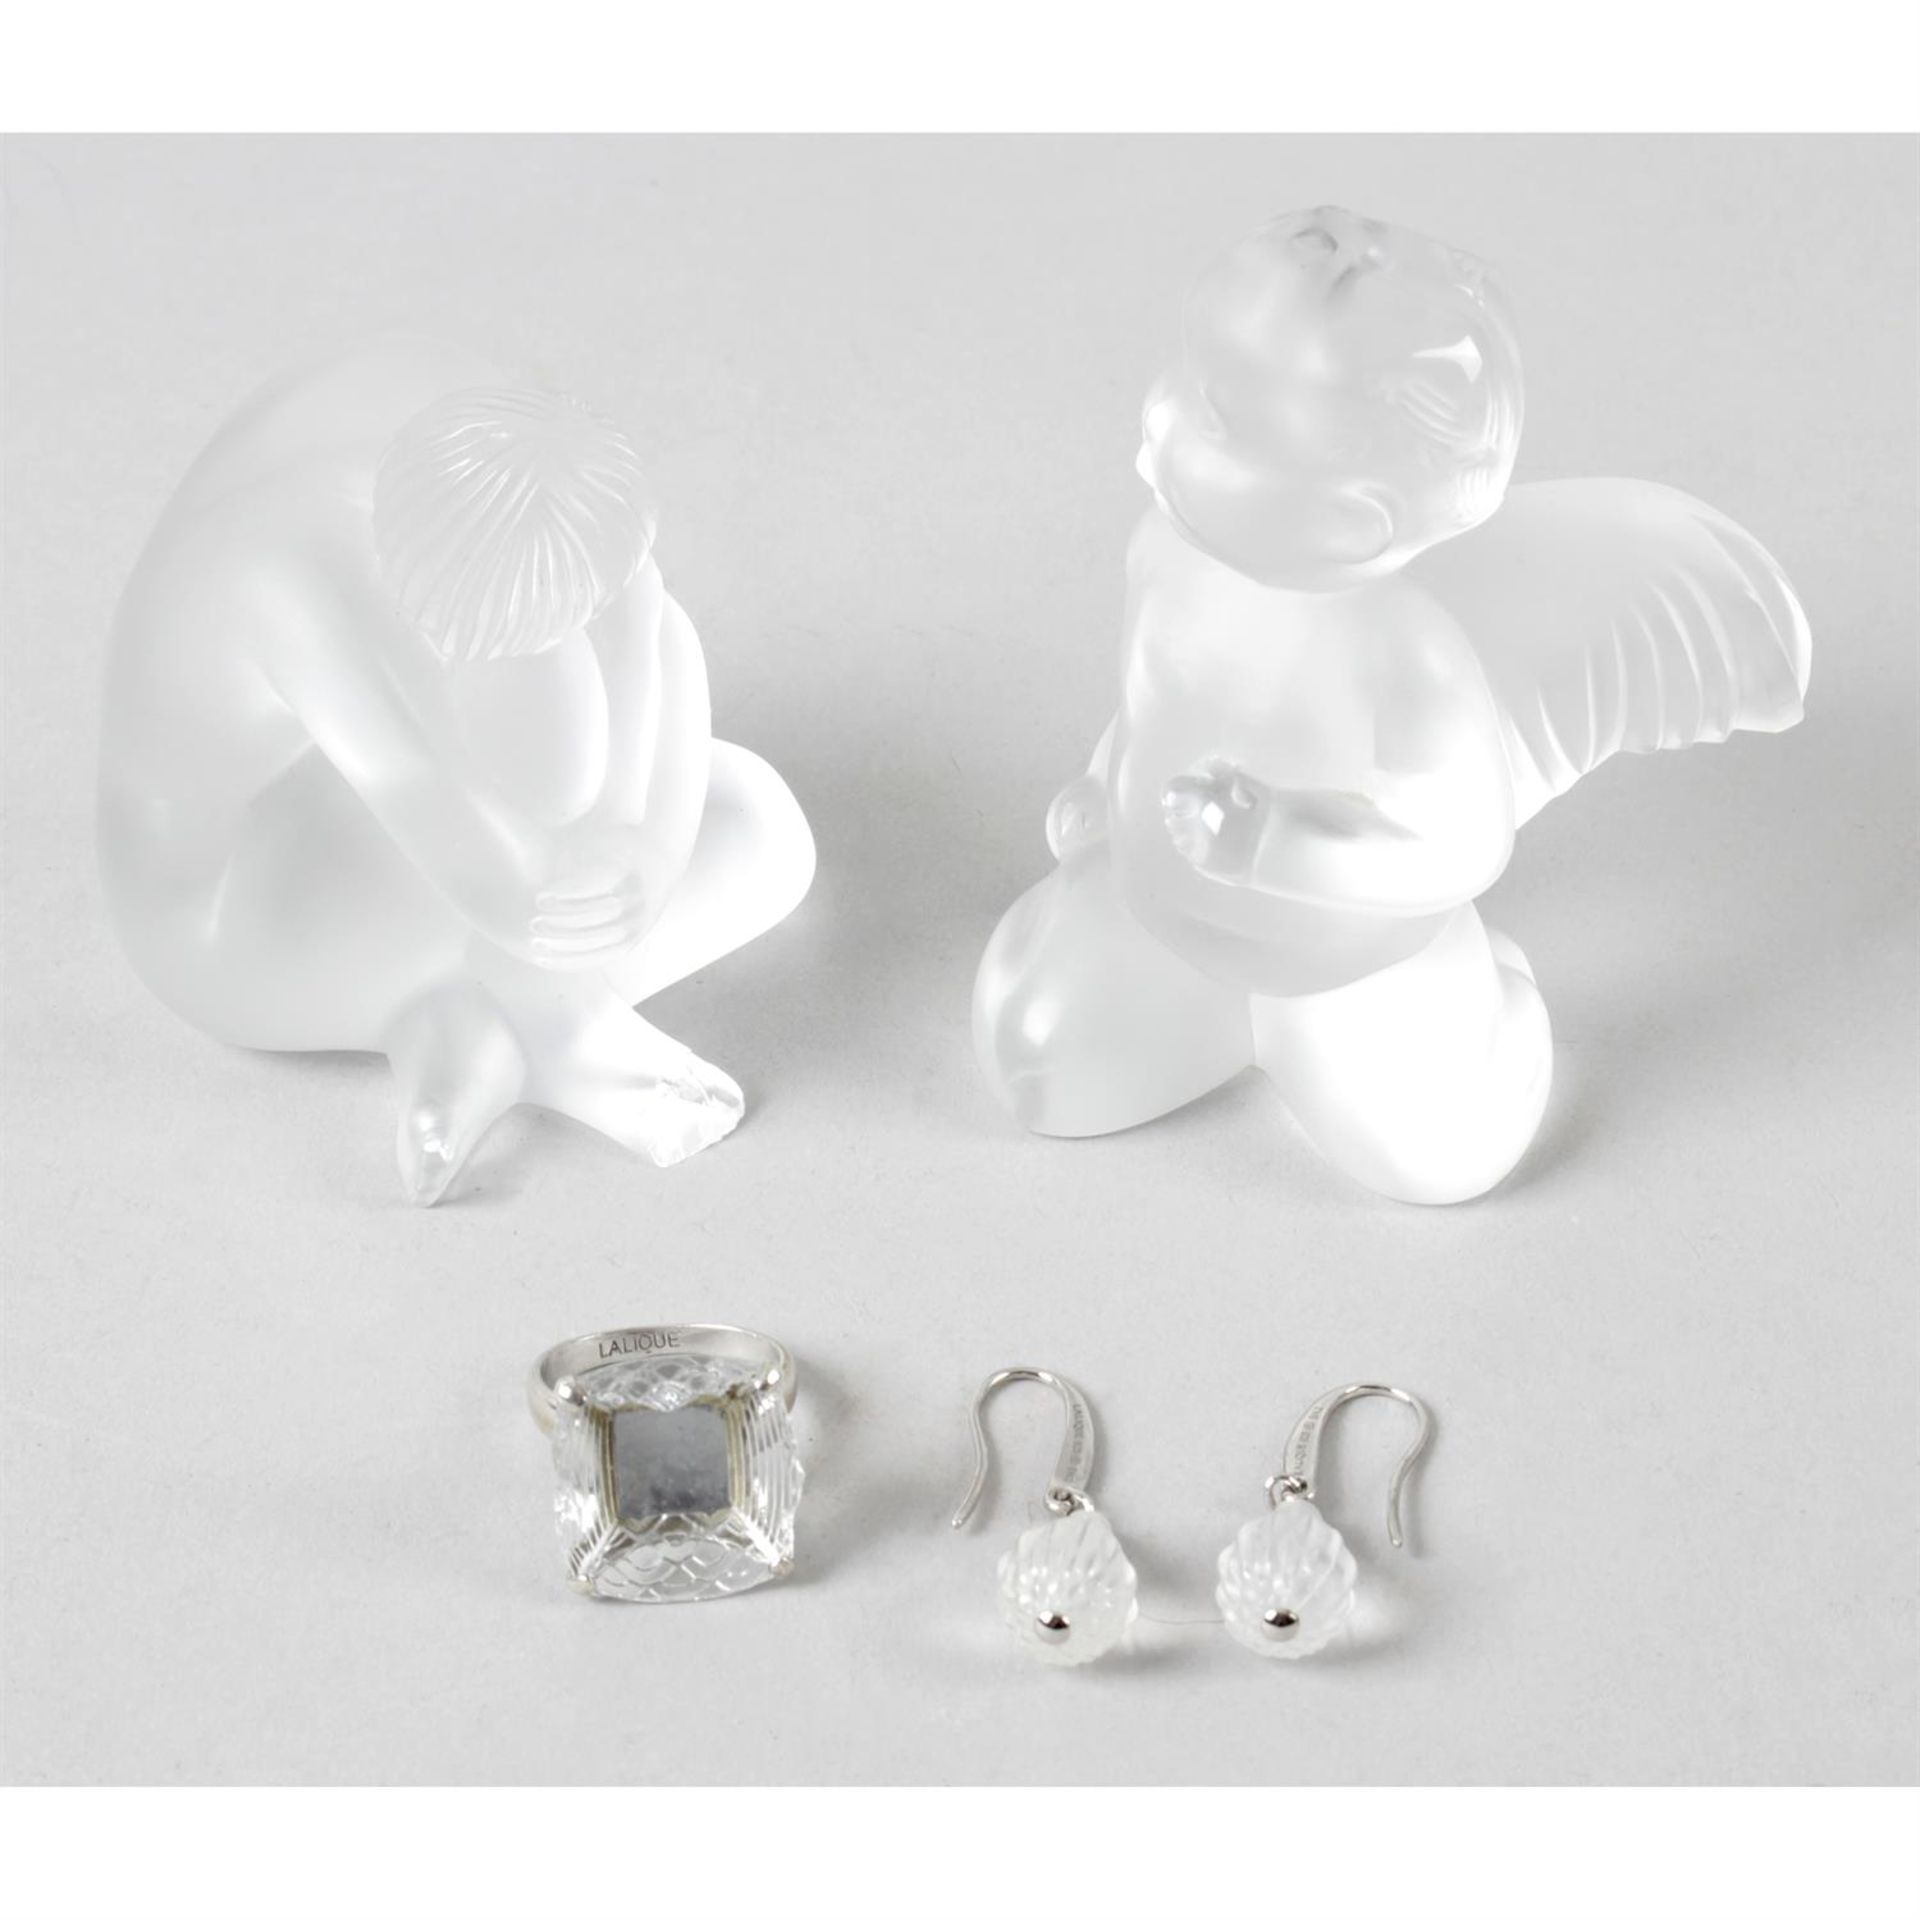 A Lalique frosted glass cherub and seated figure, together with a ring and earrings.